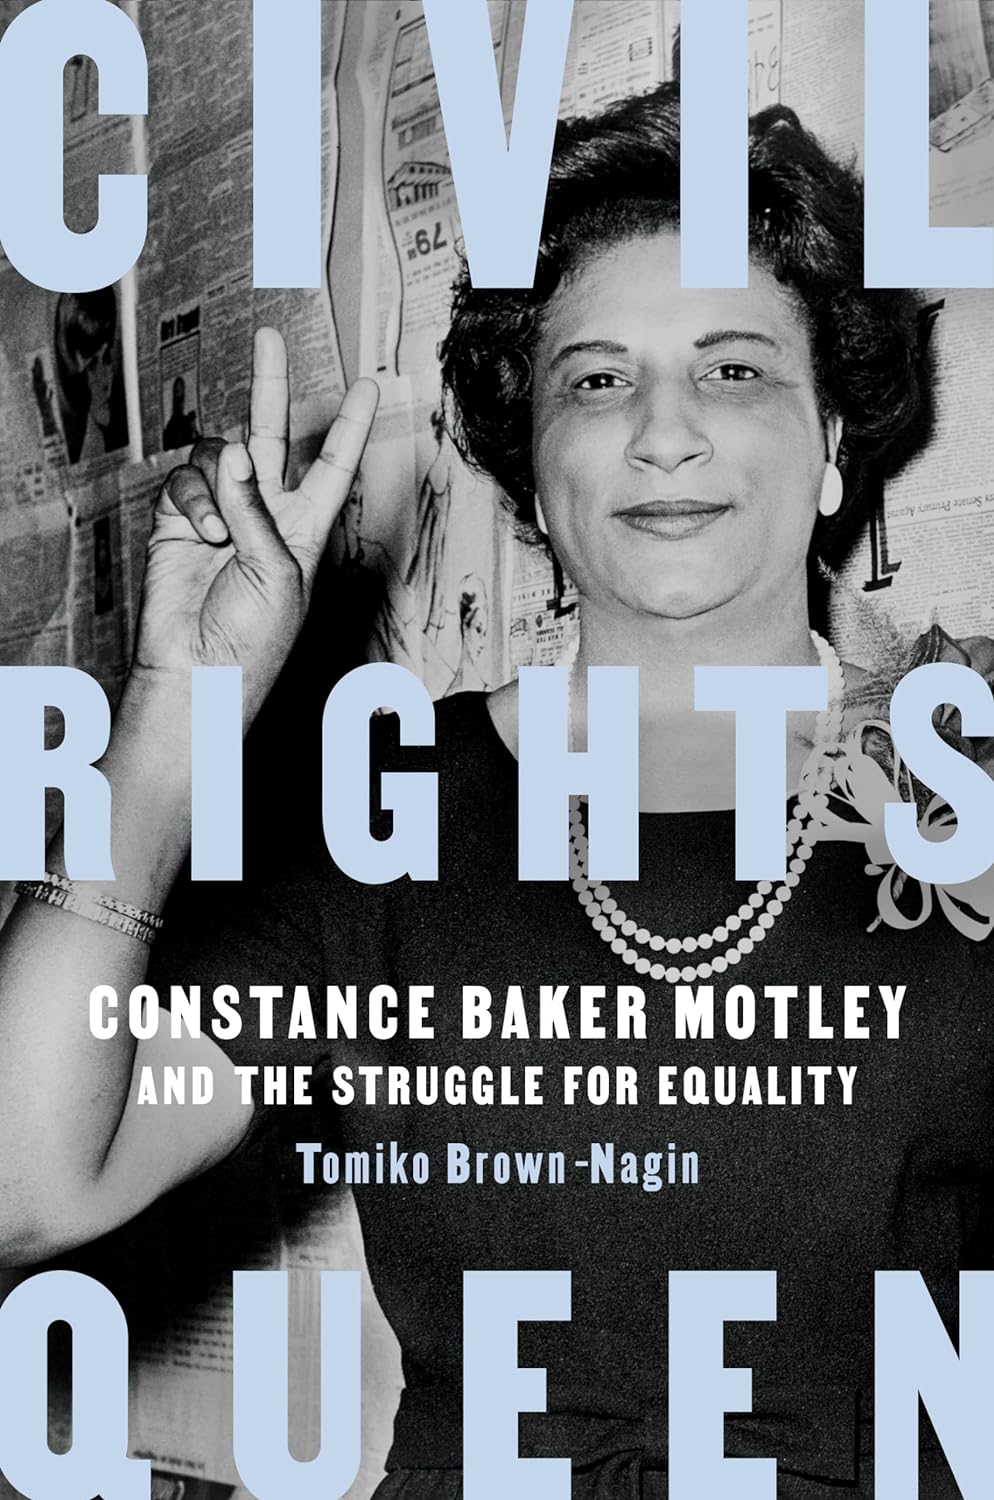 Civil Rights Queen Constance Baker Motley and the Struggle for Equality by Tomiko Brown-Nagin